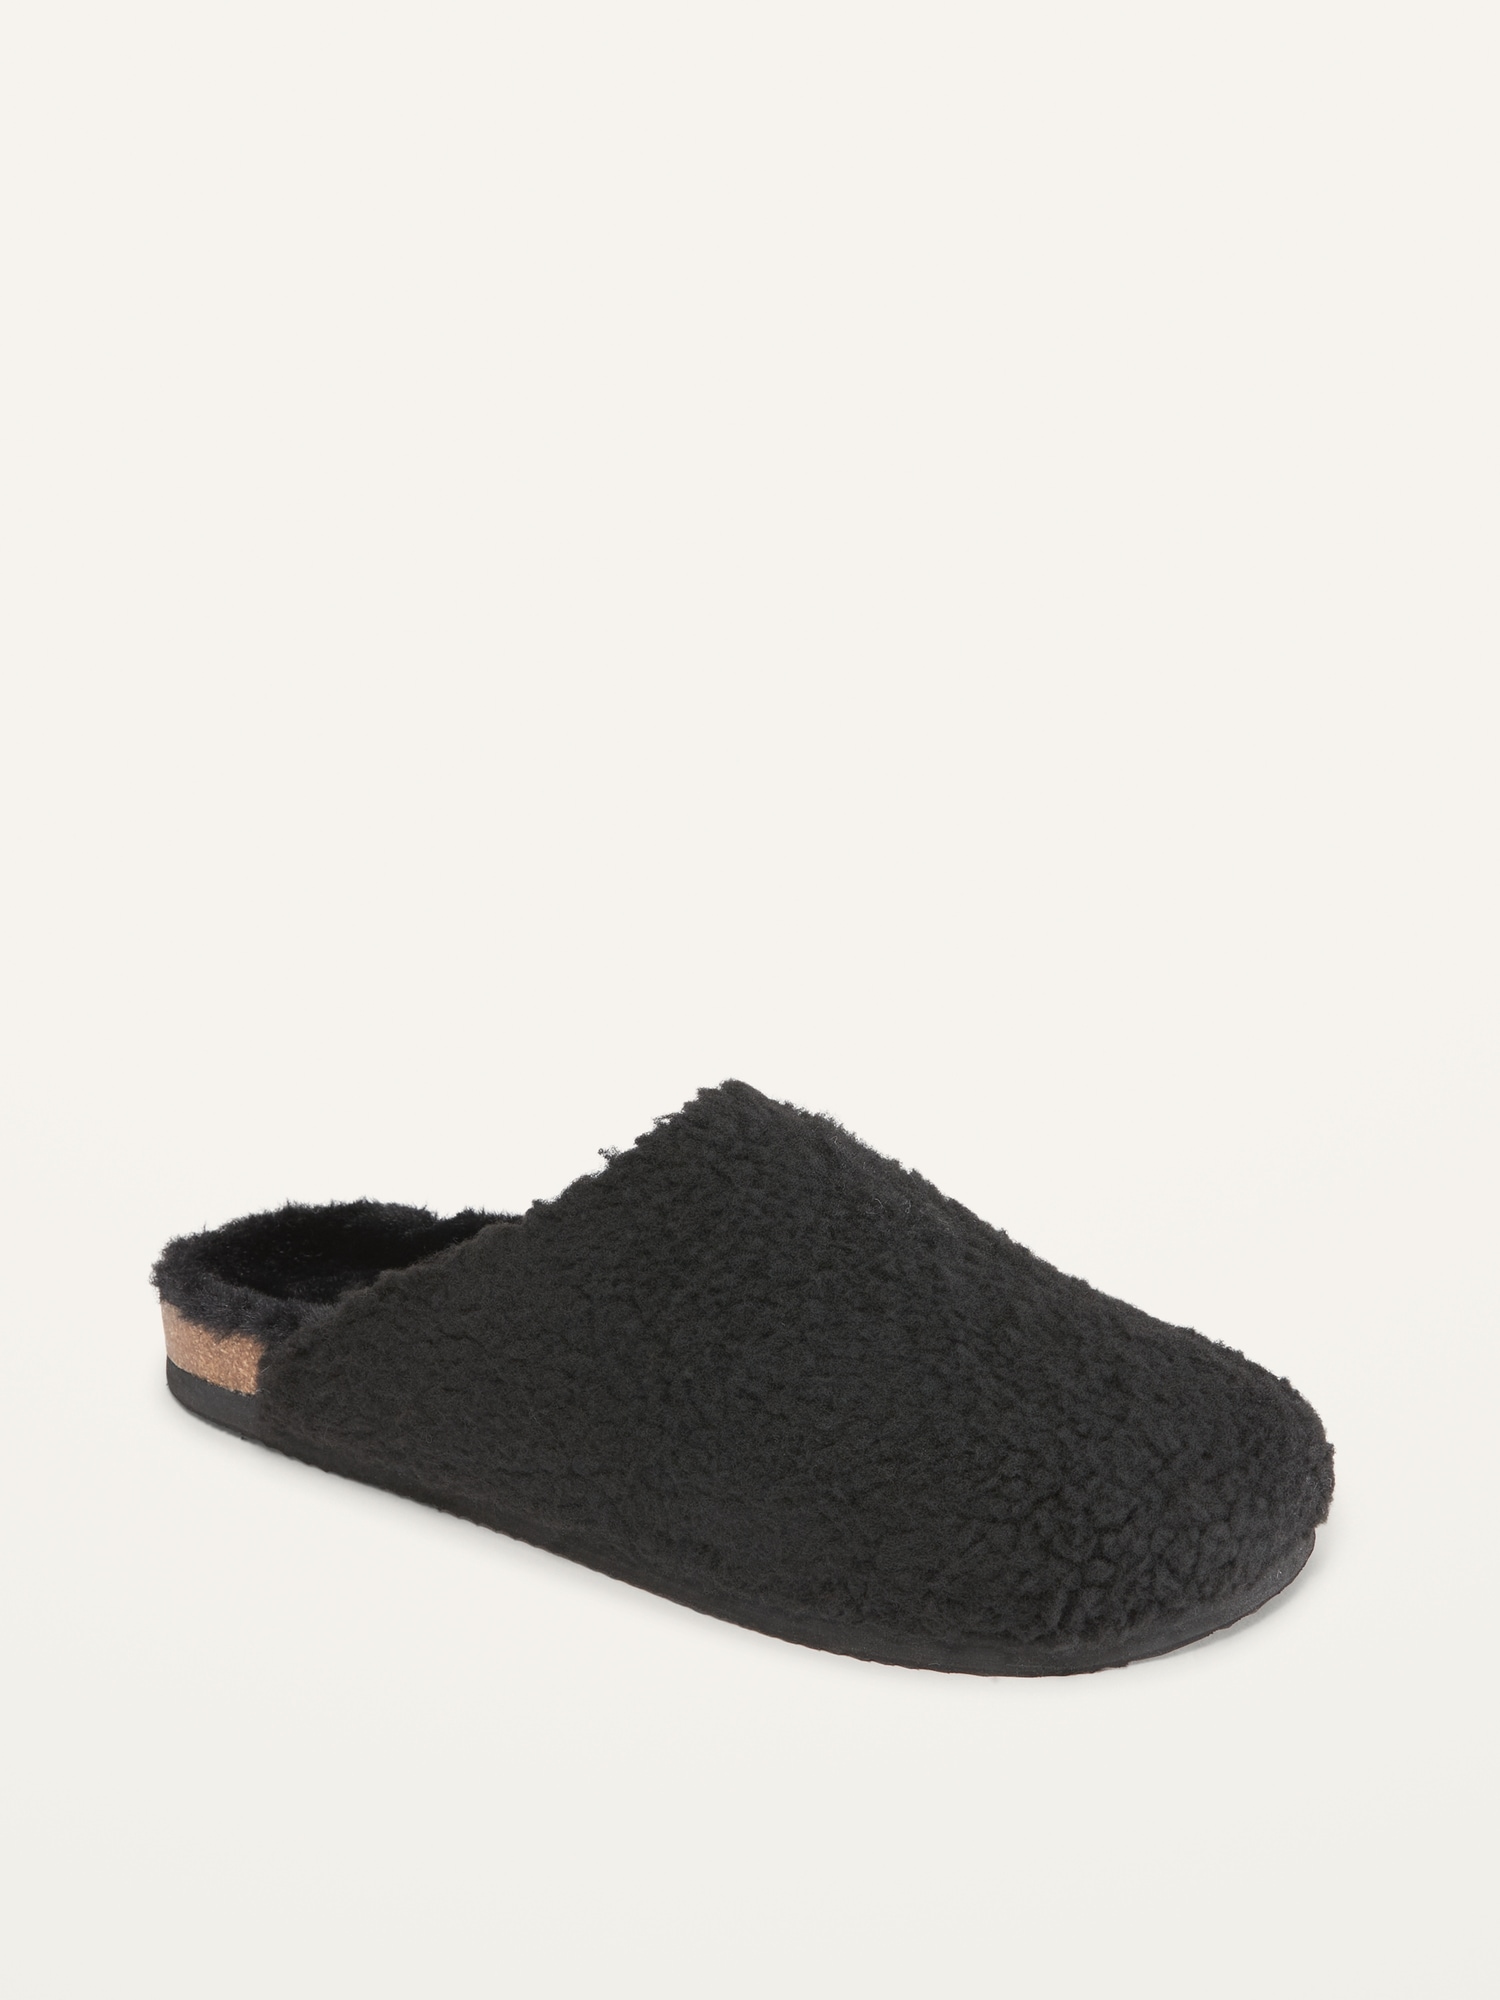 Cozy Sherpa Mule Slippers For Old